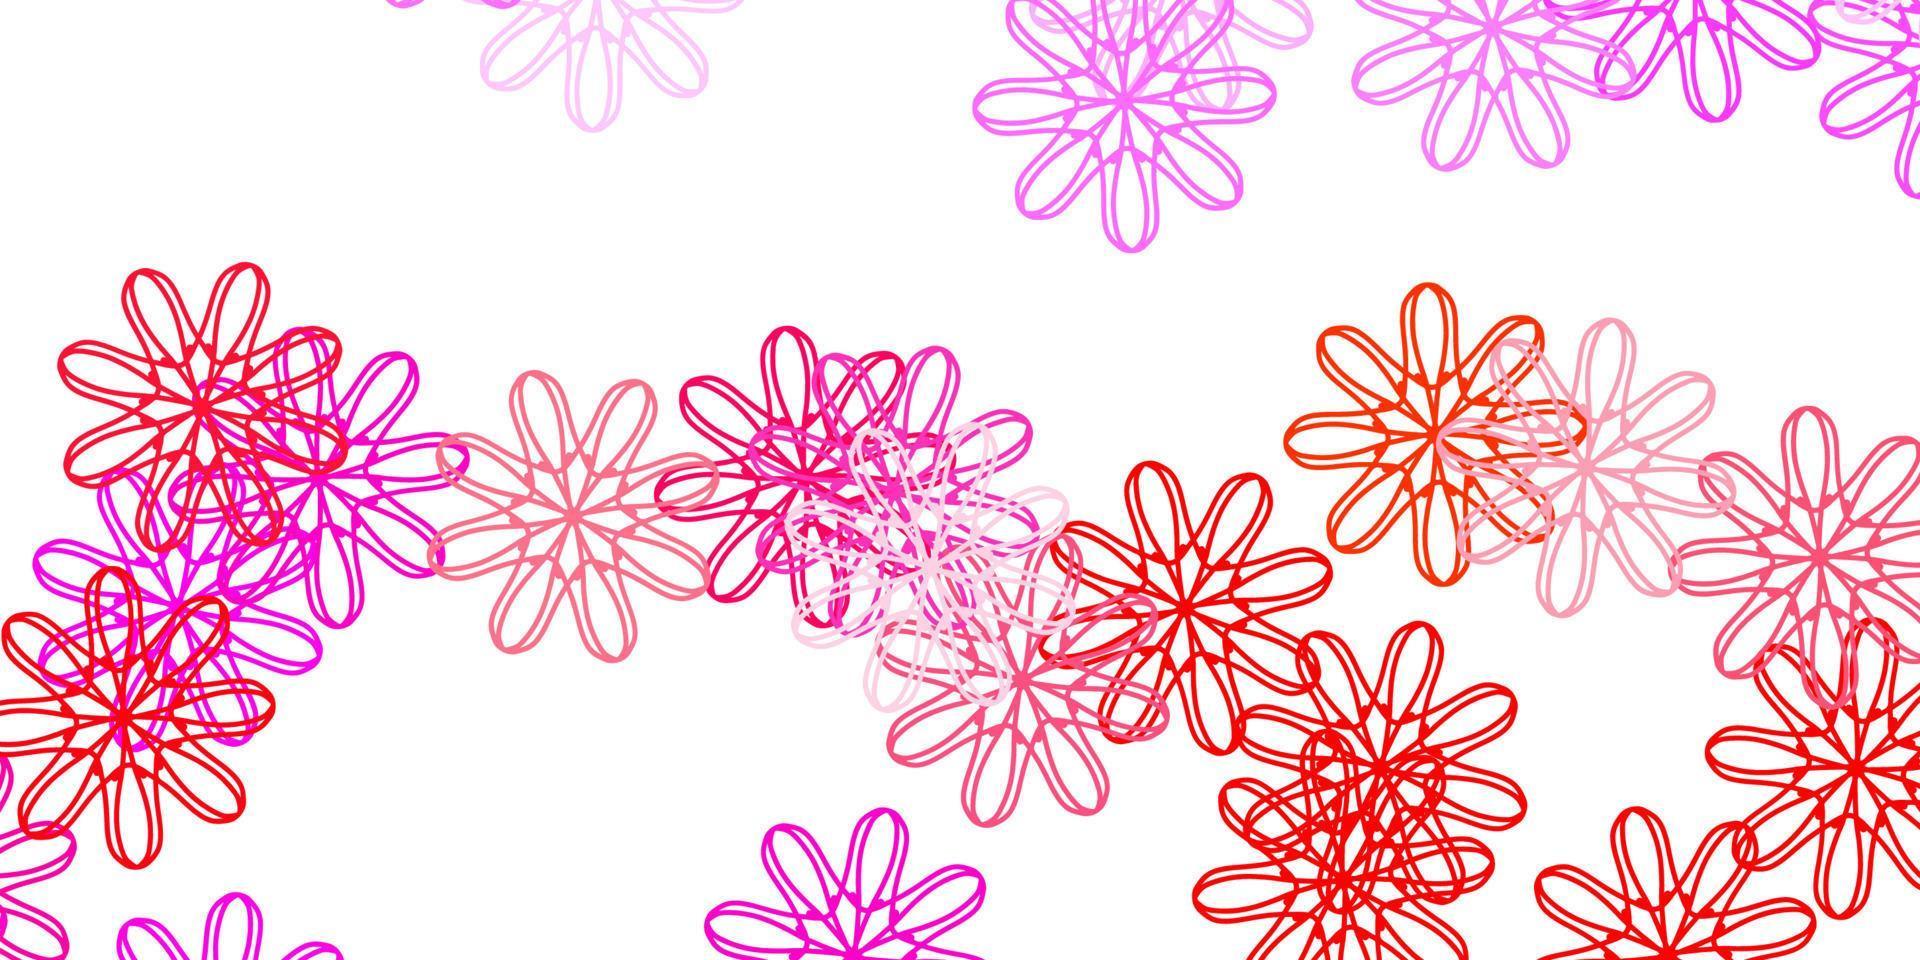 Light Pink, Yellow vector doodle texture with flowers.